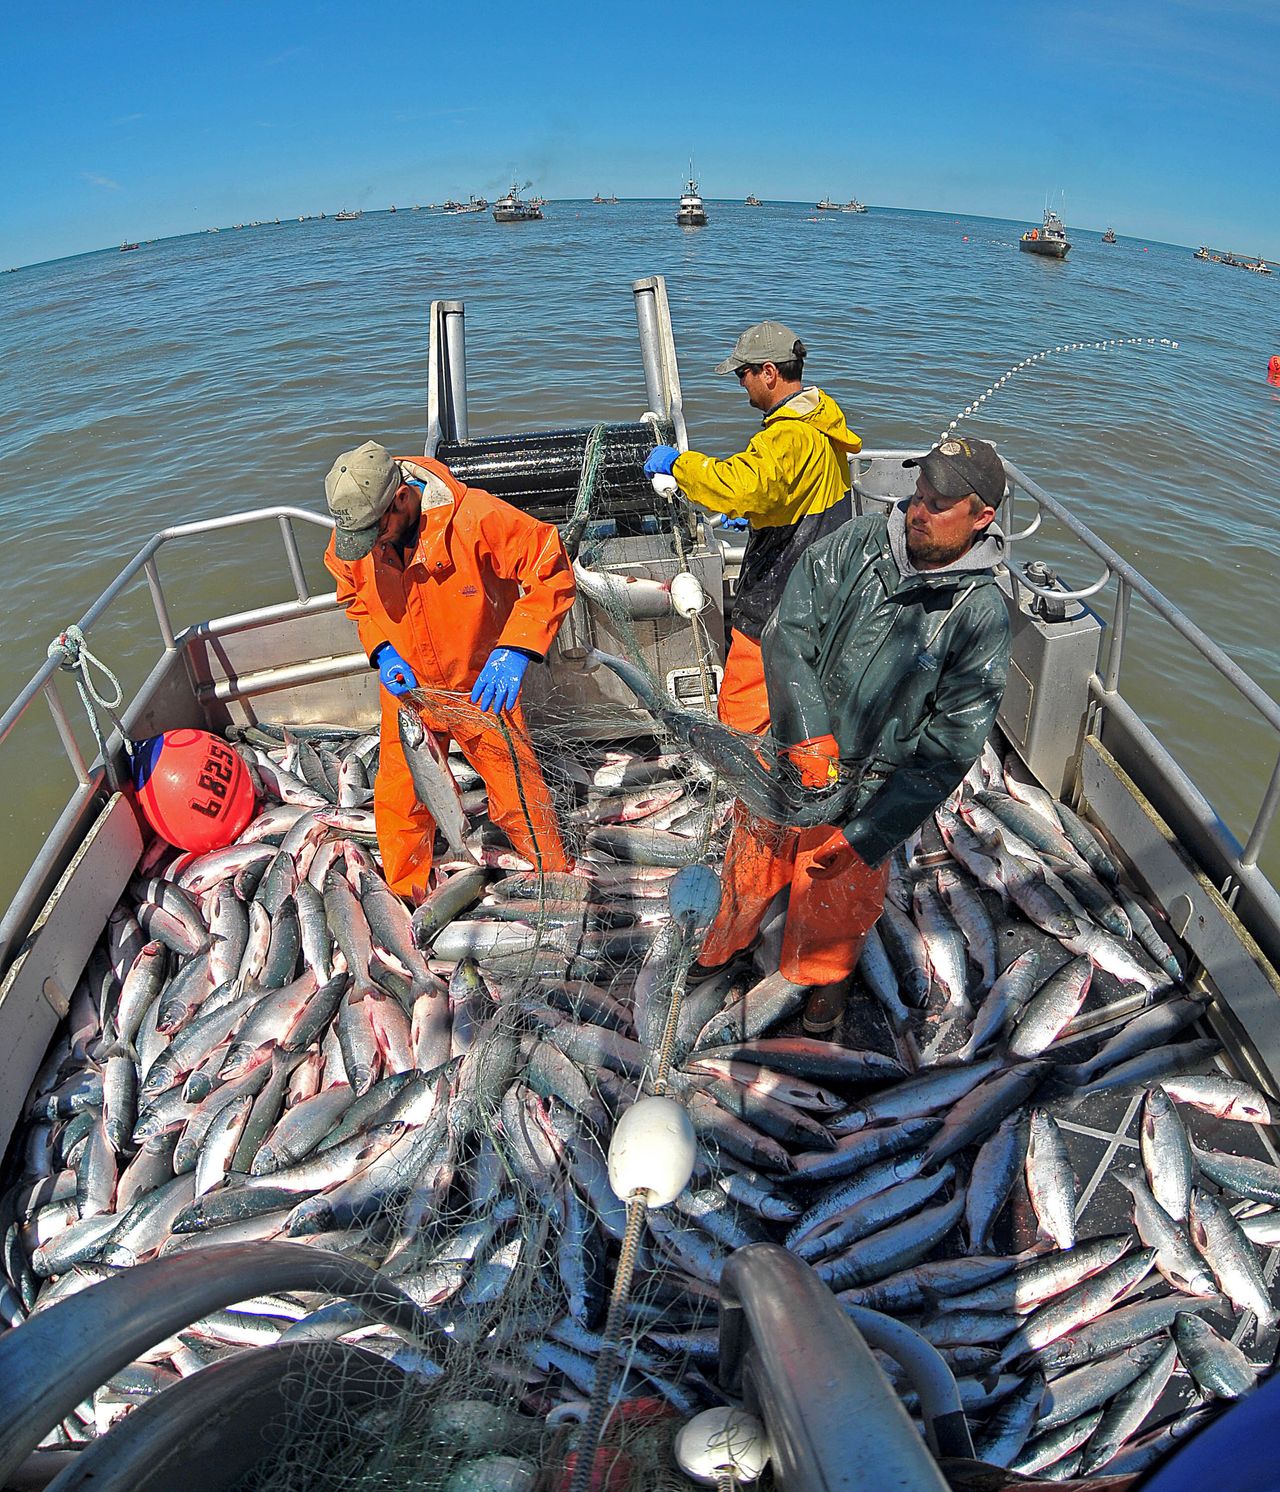 In this 2009 file photo, fishermen work to remove sockeye salmon from their net in the Egegik district of the Bristol Bay, Alaska, sockeye salmon fishery.